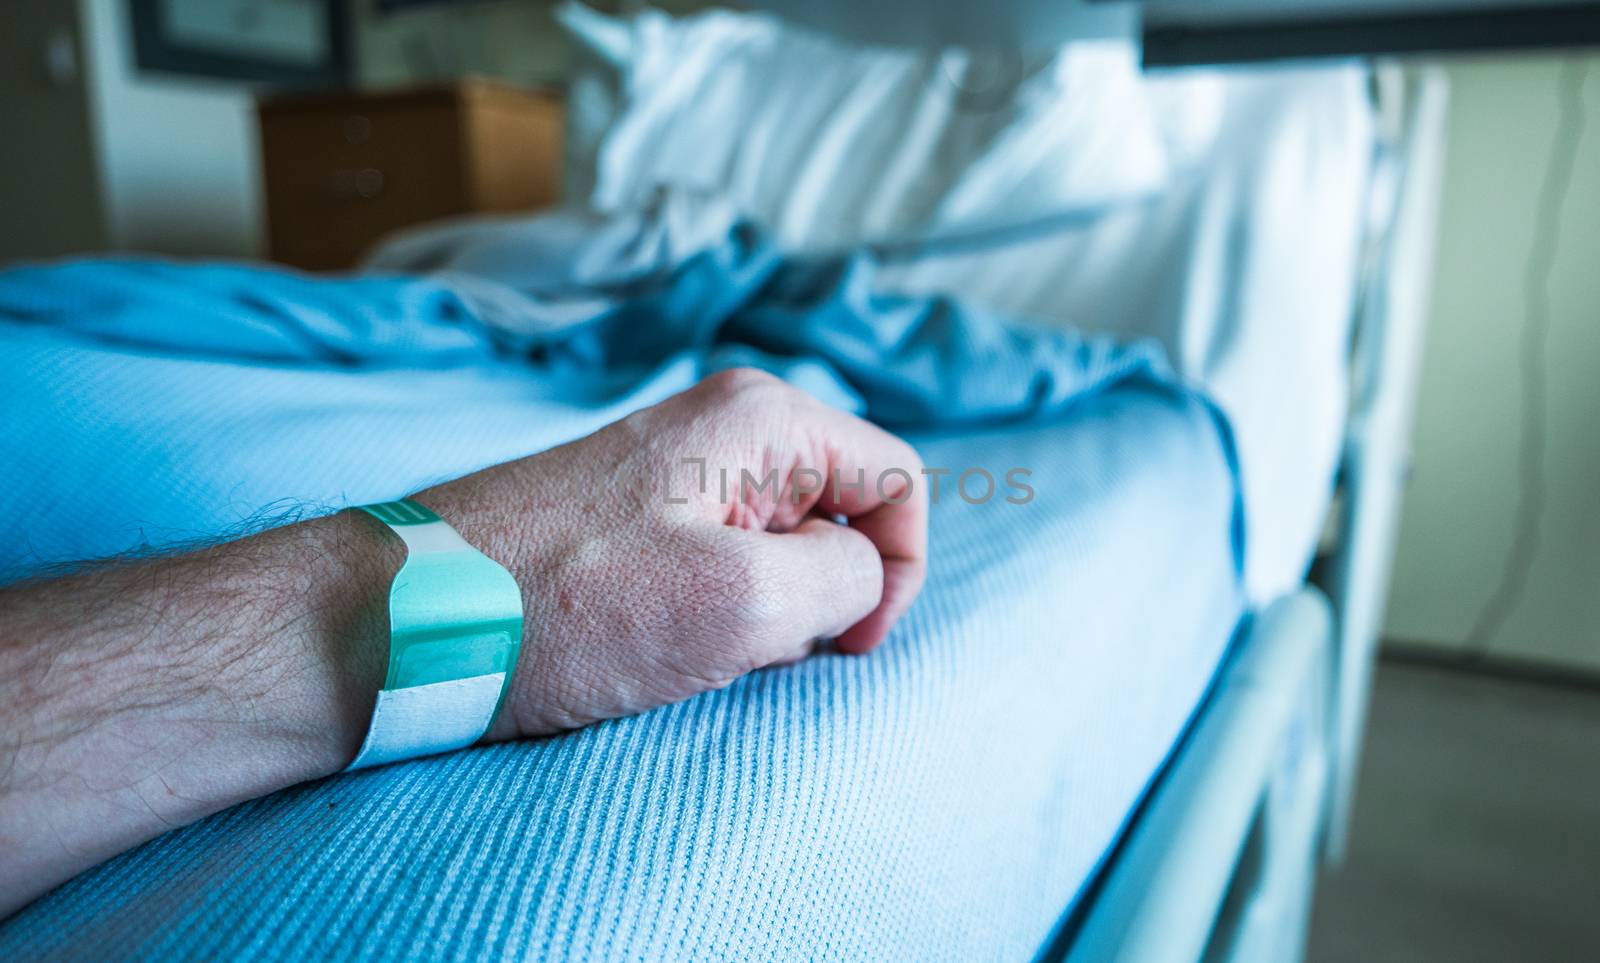 Detail Of A Man's Arm On A Hospital Bed With Wrist Tag